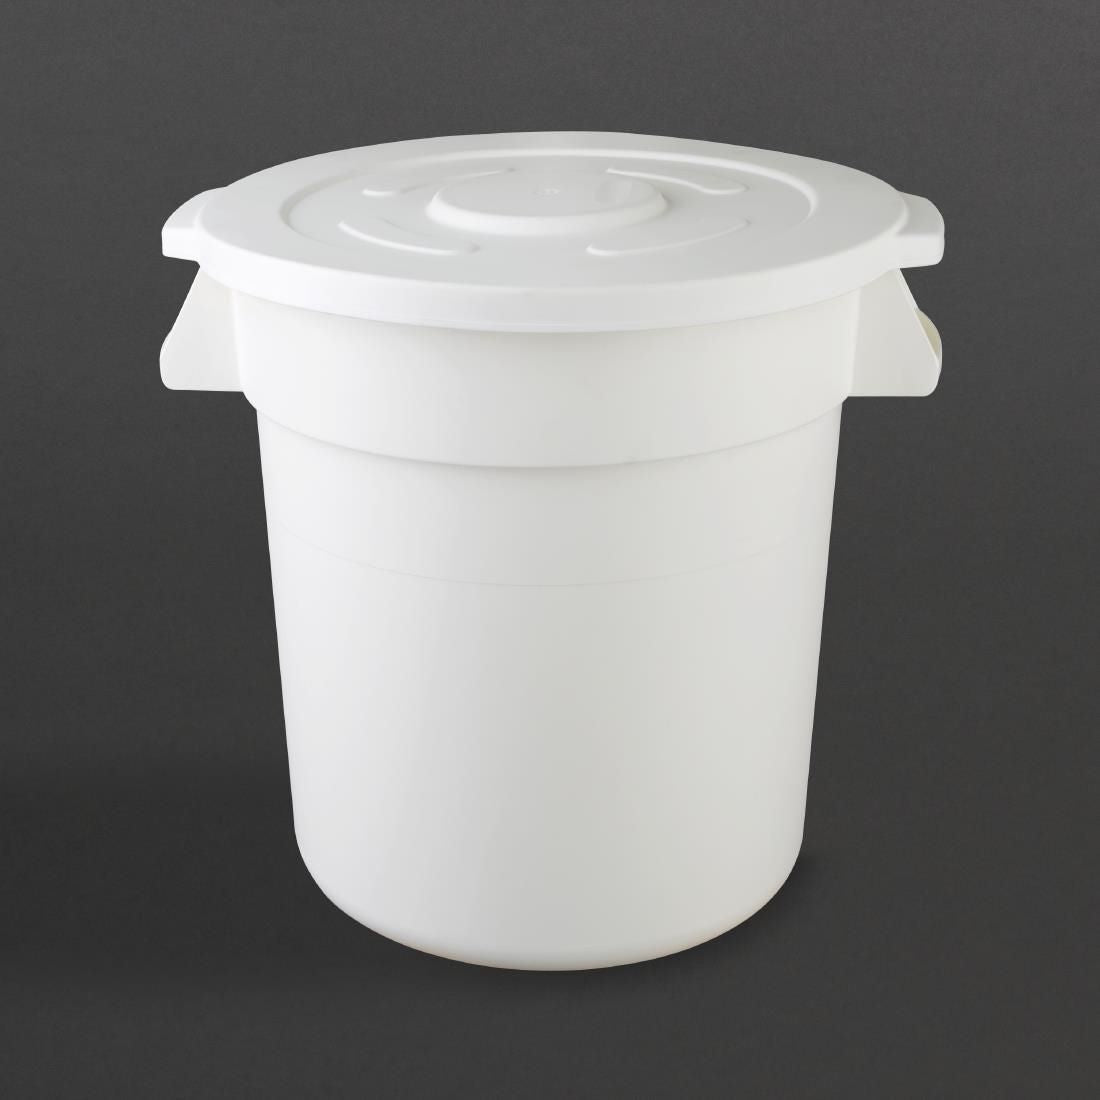 GG792 Vogue Polypropylene Round Container Bin White 38Ltr JD Catering Equipment Solutions Ltd